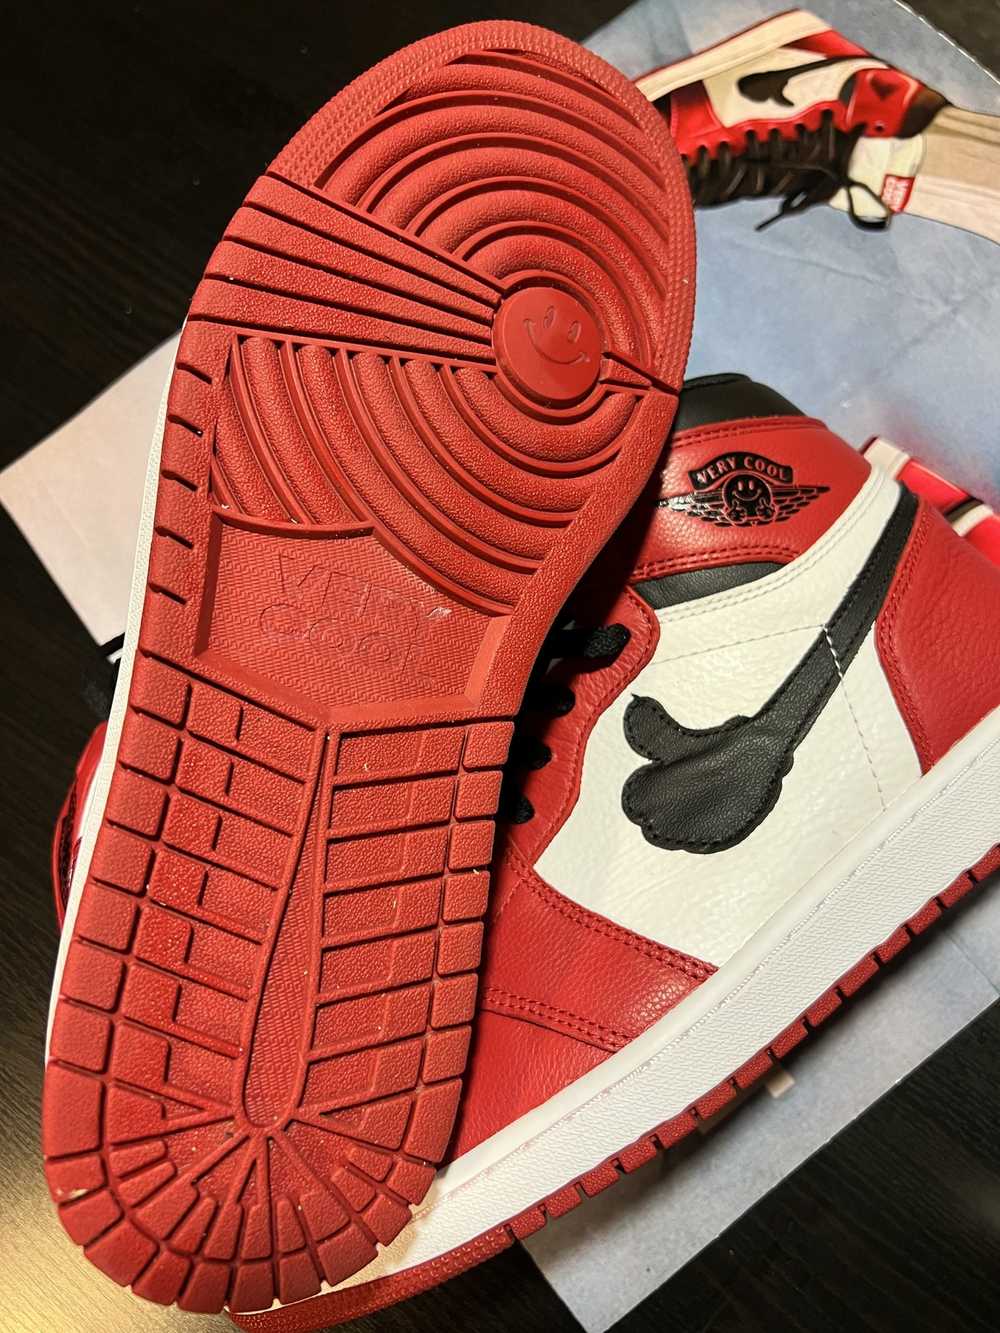 Custom × Very Cool Very Cool Chicago 1 - image 3